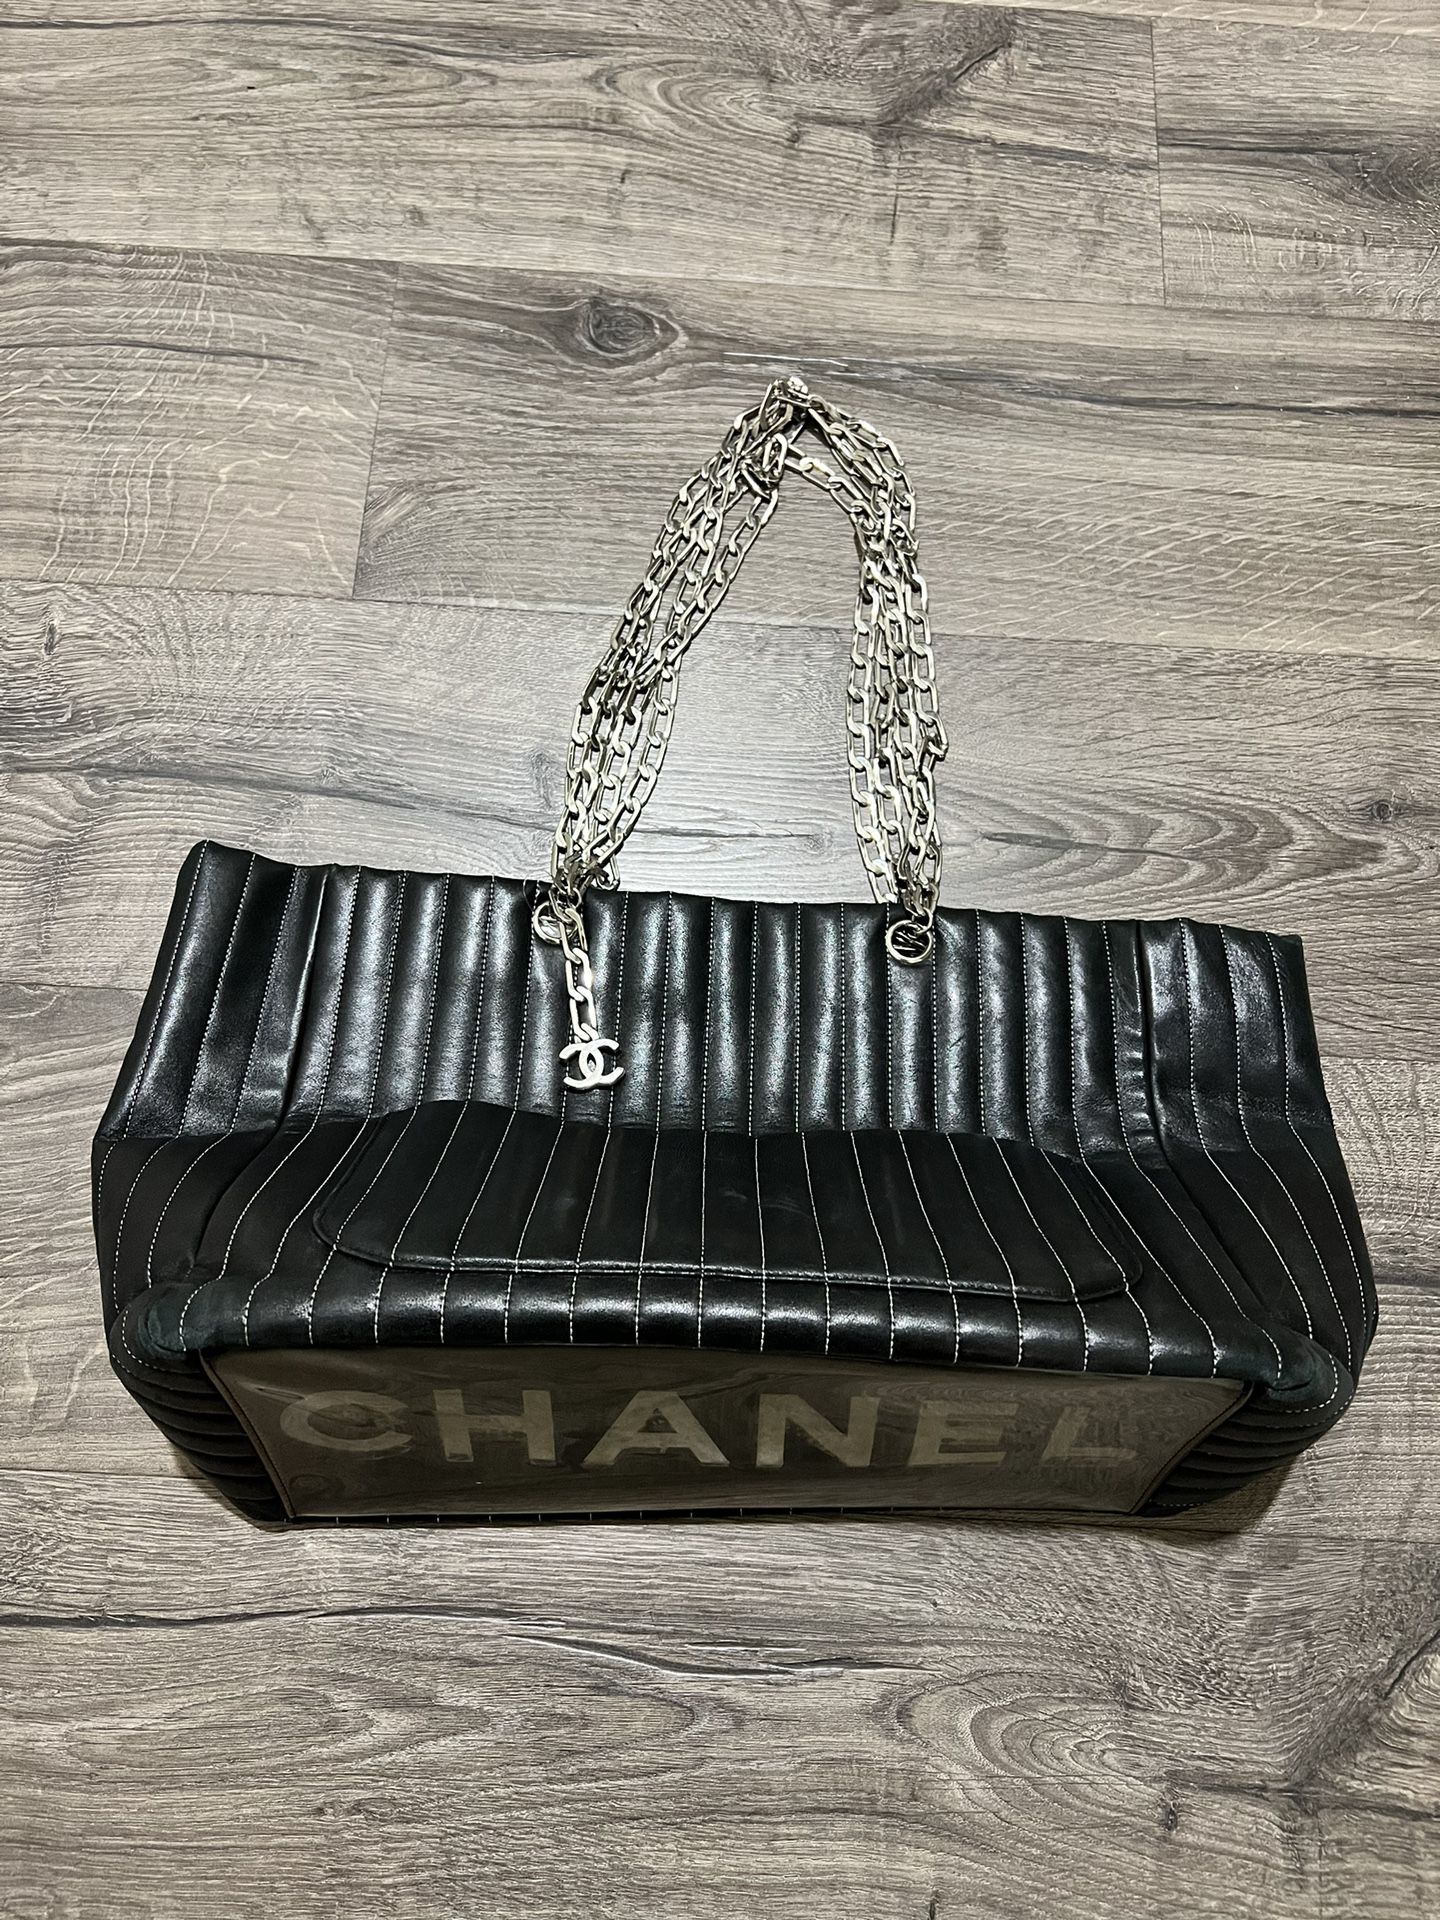 Chanel Mademoiselle Vertical Quilted Tote Bag for Sale in Mesa, AZ - OfferUp